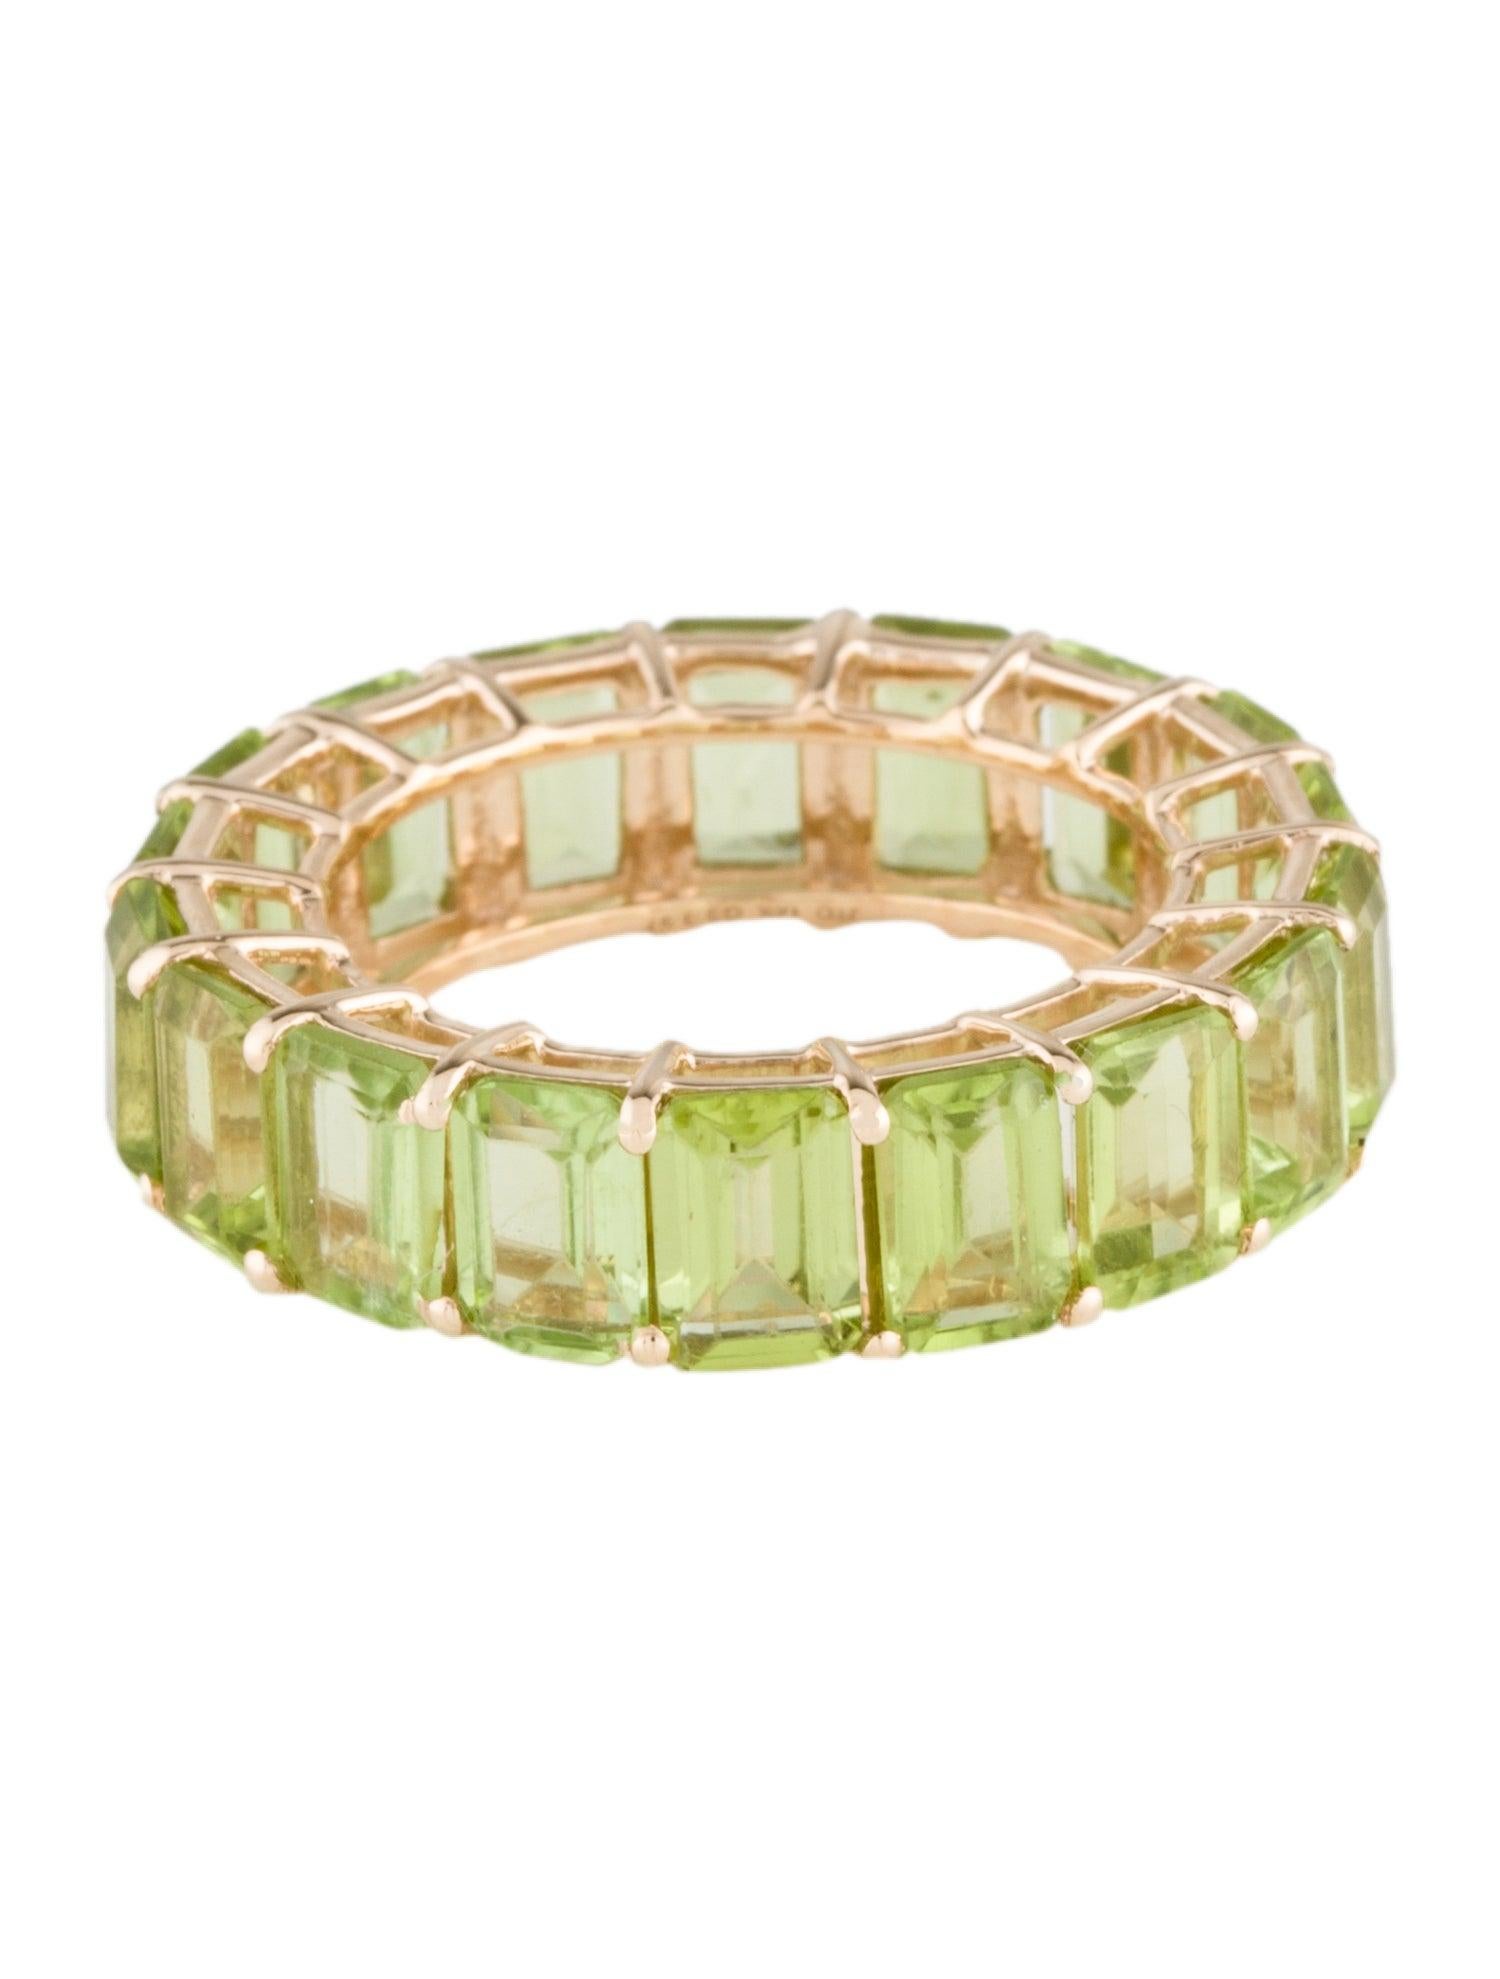 Introducing our stunning 14K Yellow Gold Peridot Eternity Band, a true celebration of timeless elegance and vibrant beauty. Sized at 7, this exquisite ring is adorned with a continuous circle of cut cornered rectangular step cut peridots, each